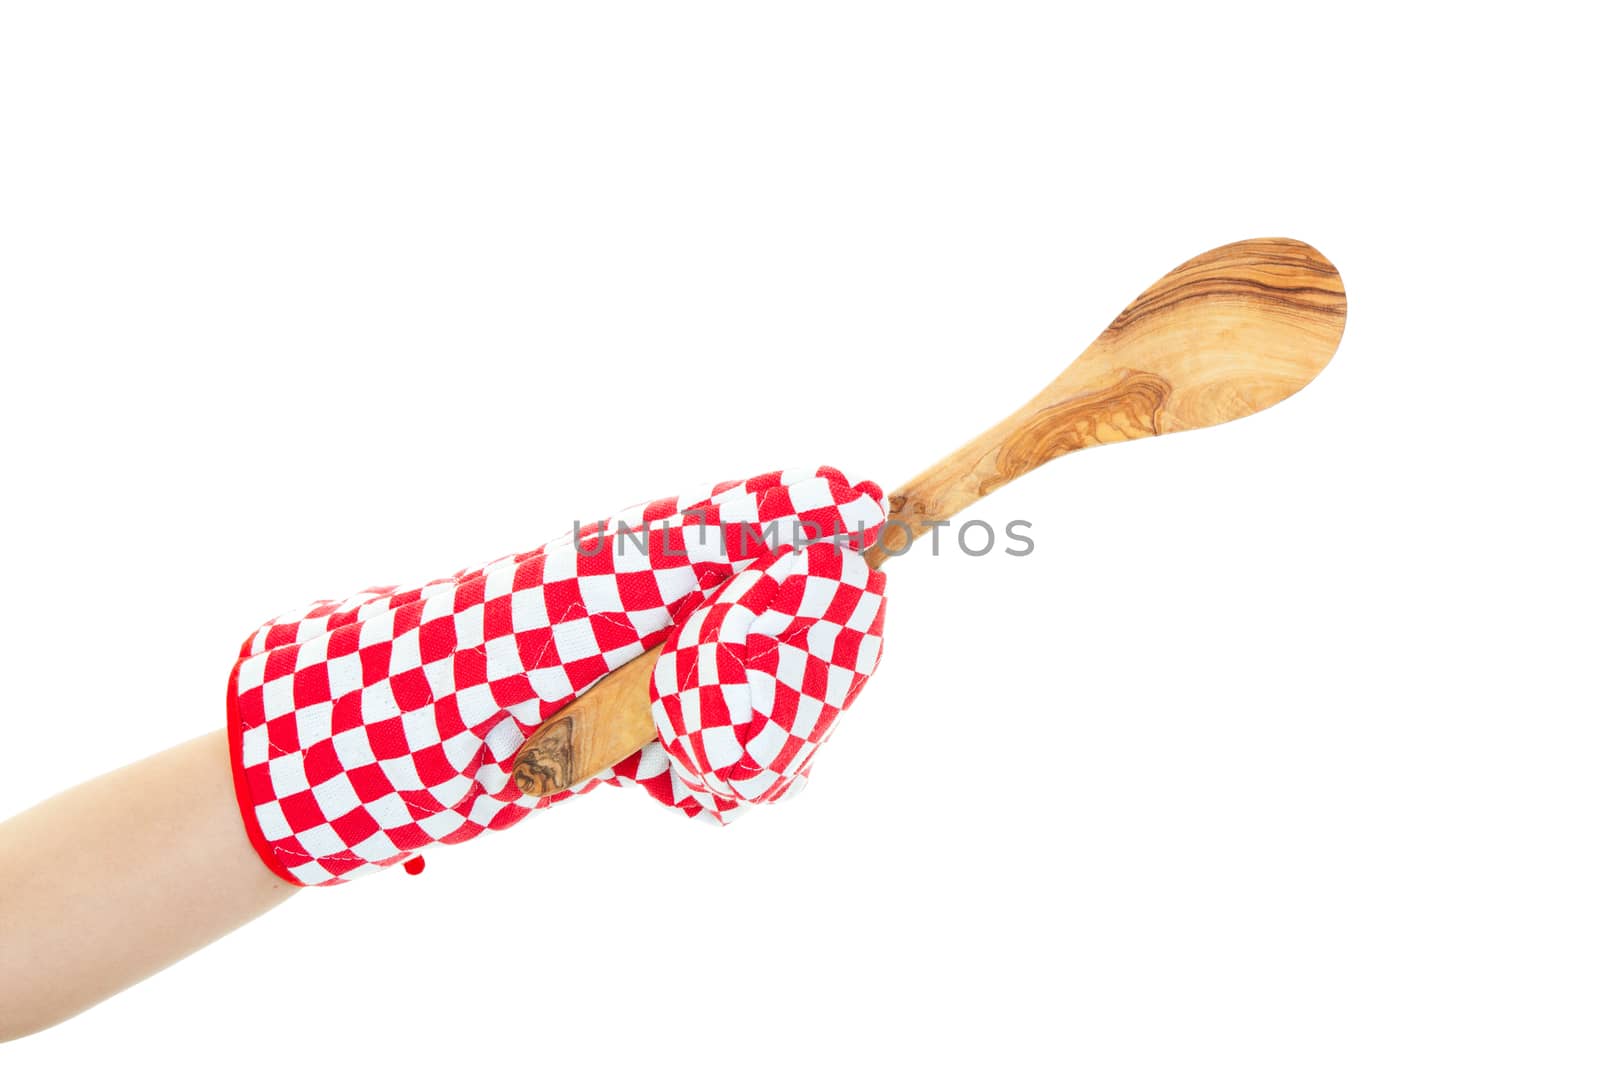 A cook's arm wearing an oven mitt and pointing with a wooden spoon.